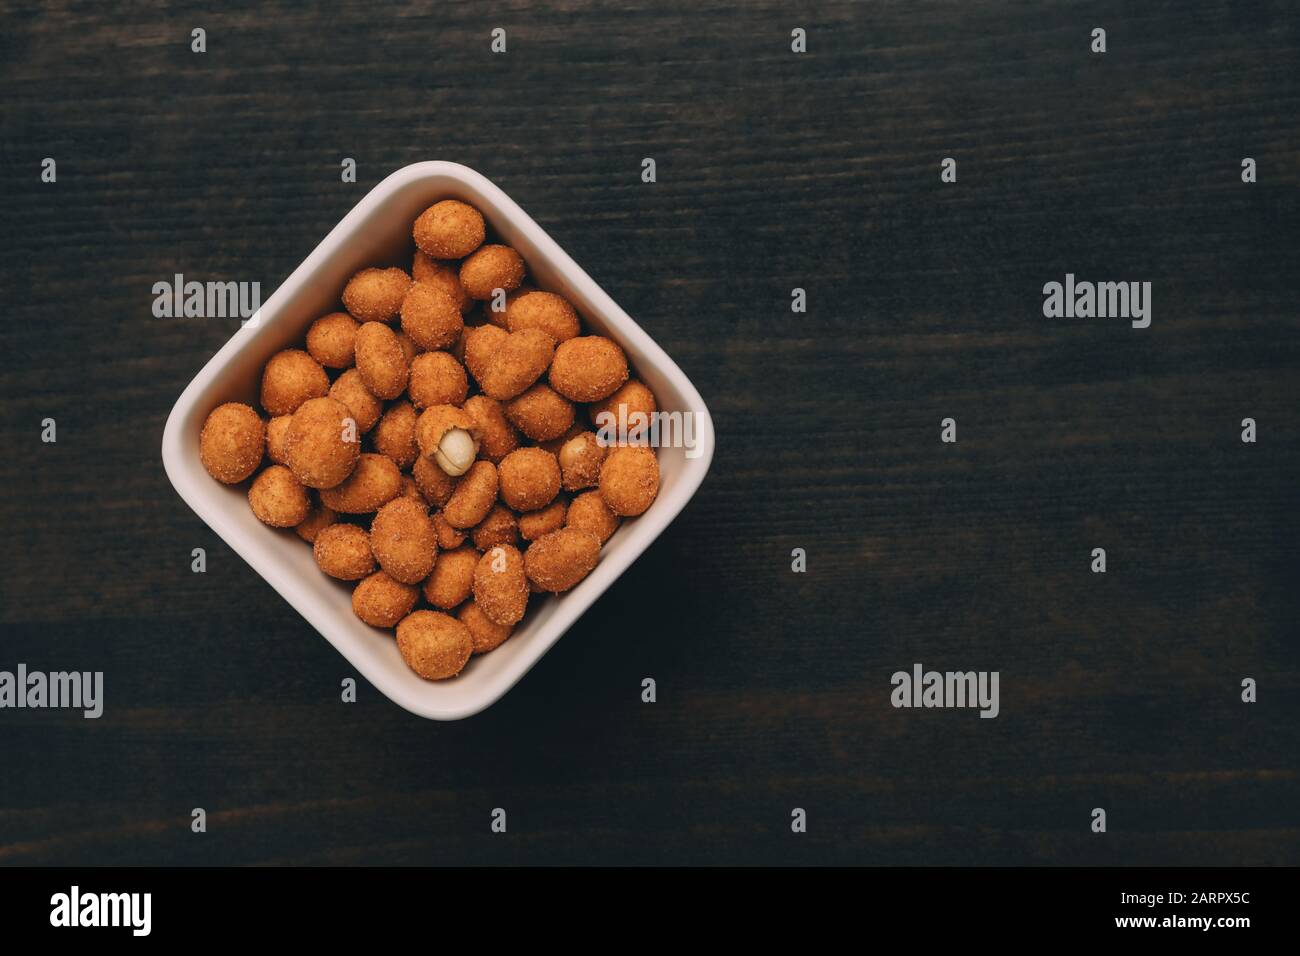 Salty peanut snack coated with barbecue sauce served in ceramic bowl on table, top view Stock Photo